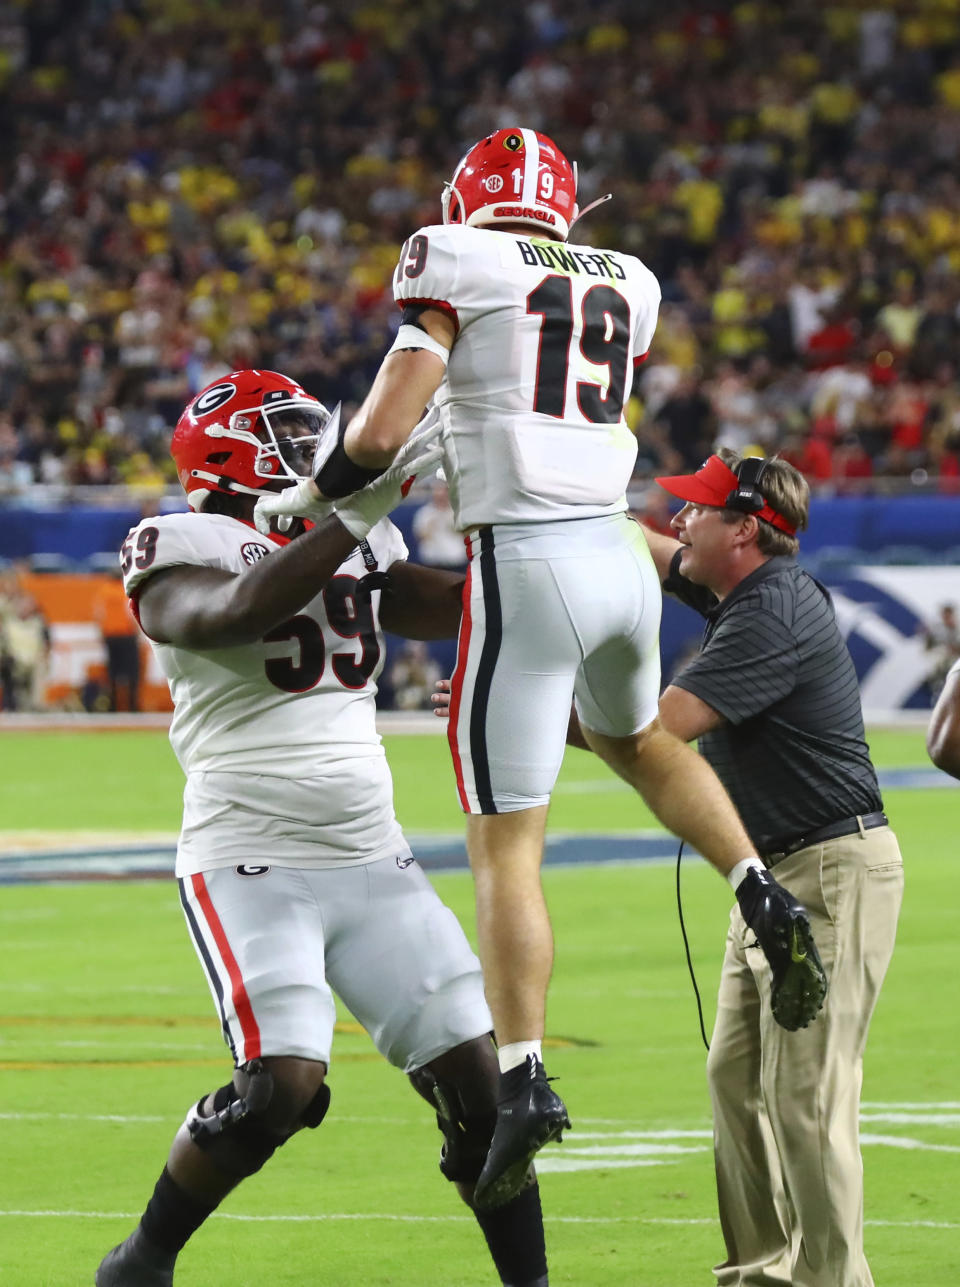 Georgia Bulldogs head coach Kirby Smart is on the field as Georgia Bulldogs offensive lineman Broderick Jones (59) celebrates their first touchdown by Georgia Bulldogs tight end Brock Bowers (19) at the 2021 College Football Playoff Semifinal between the Georgia Bulldogs and the Michigan Wolverines at the Orange Bowl at Hard Rock Stadium in Miami Gardens. (Curtis Compton/Atlanta Journal-Constitution via AP)